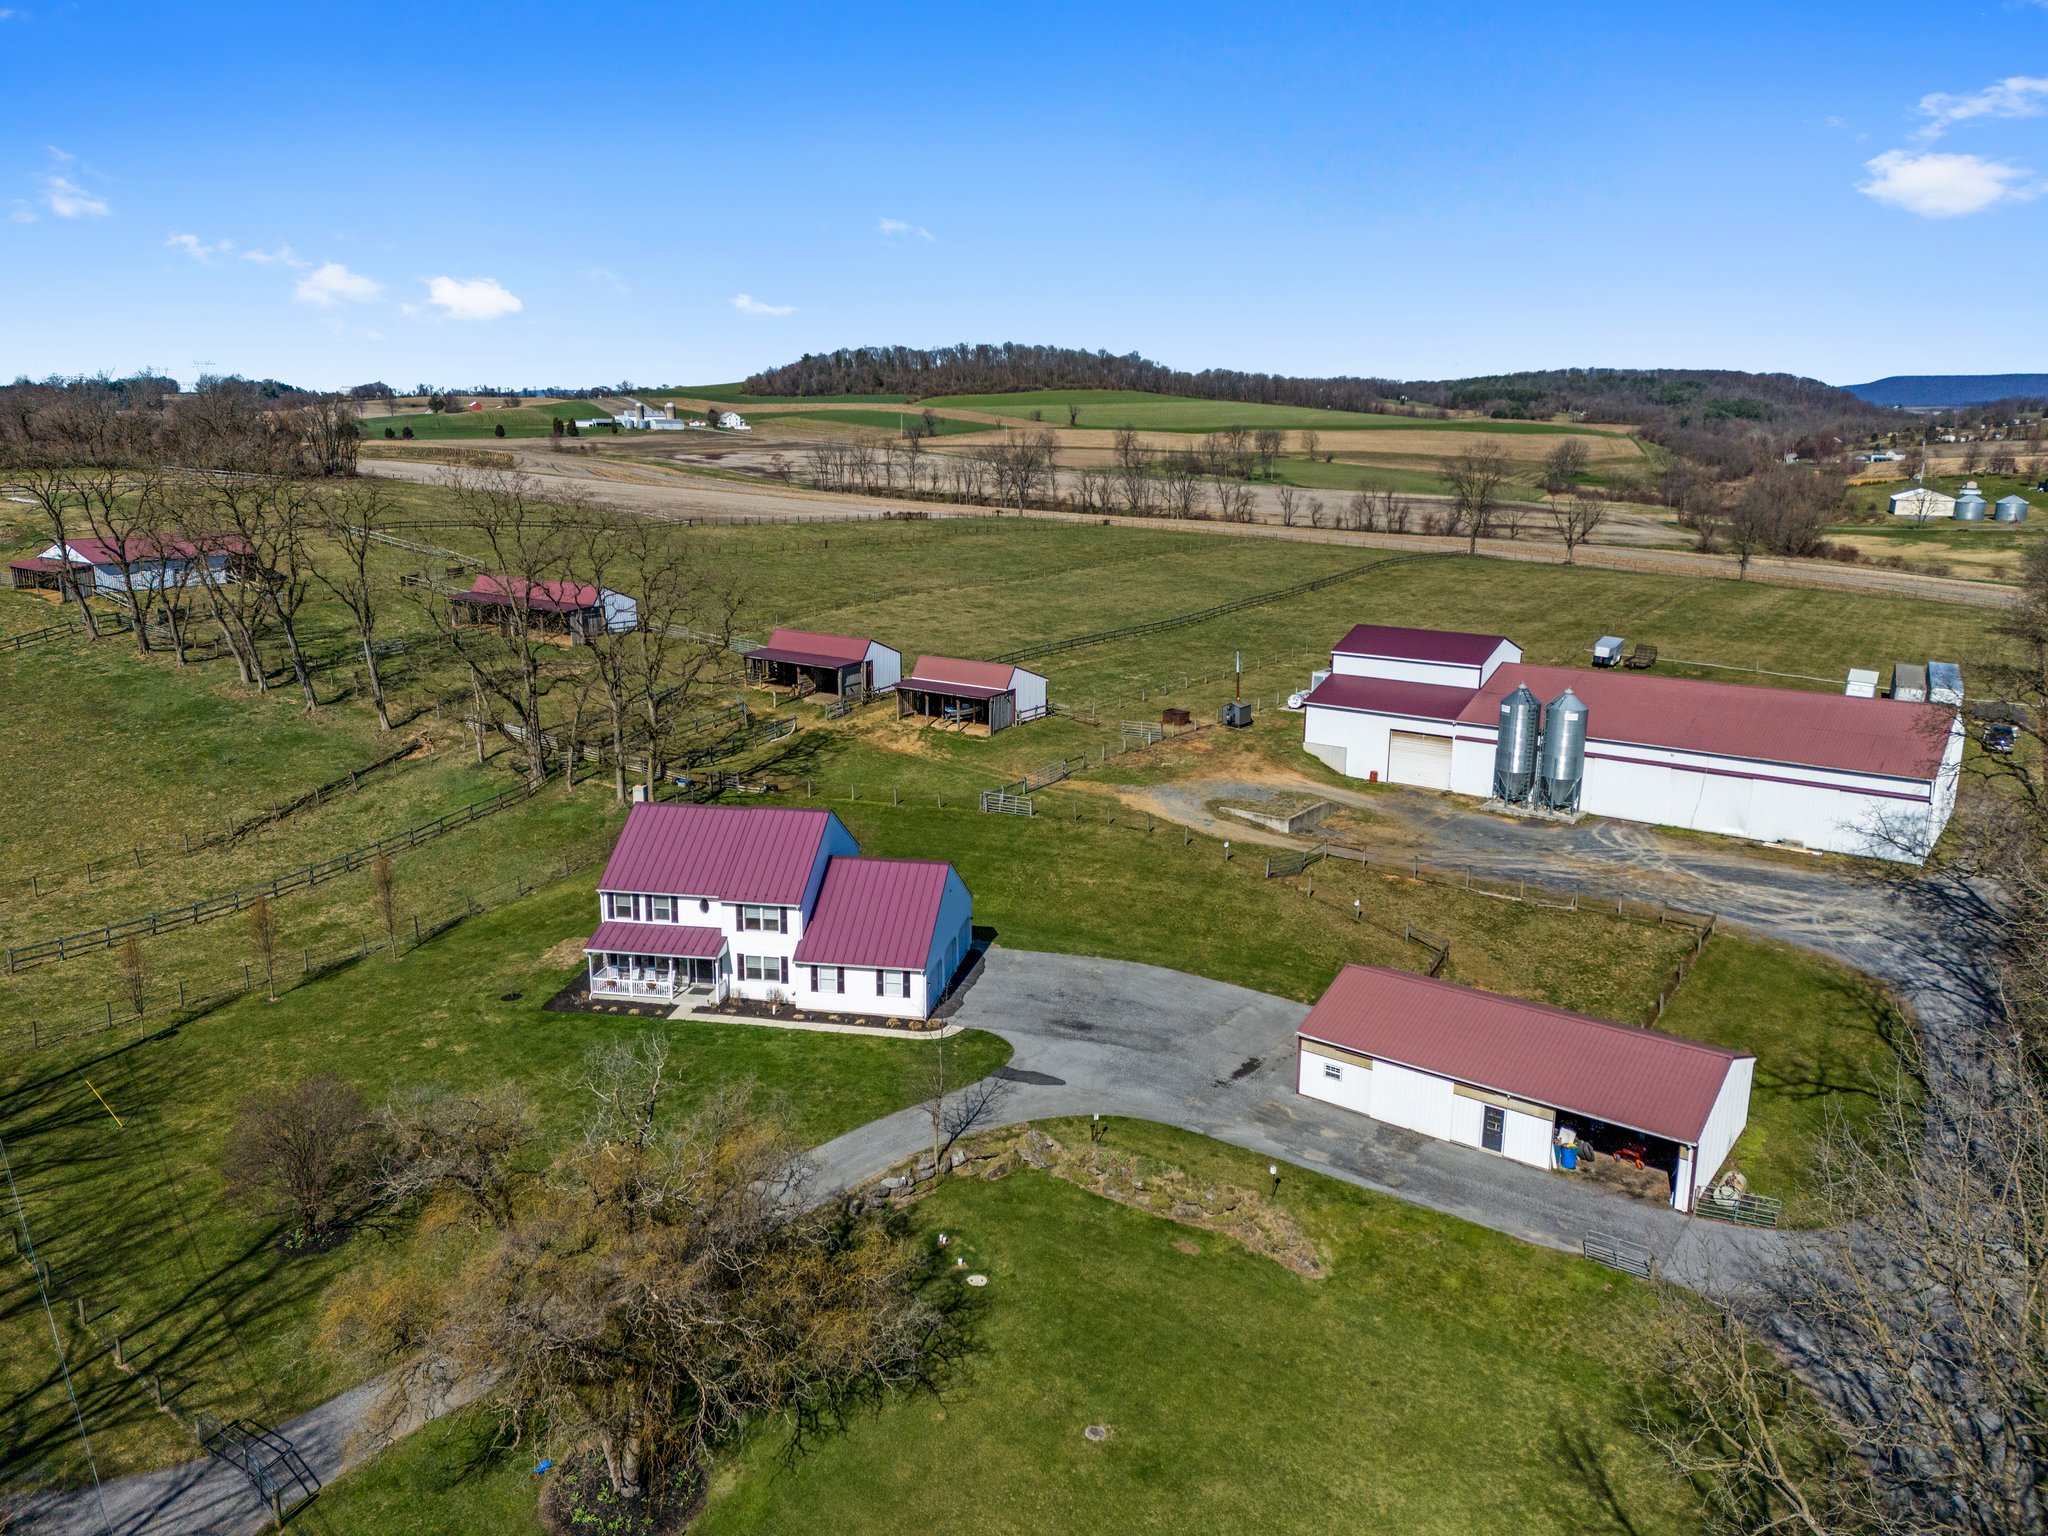 Berks County Farm for Sale with 65 Acres